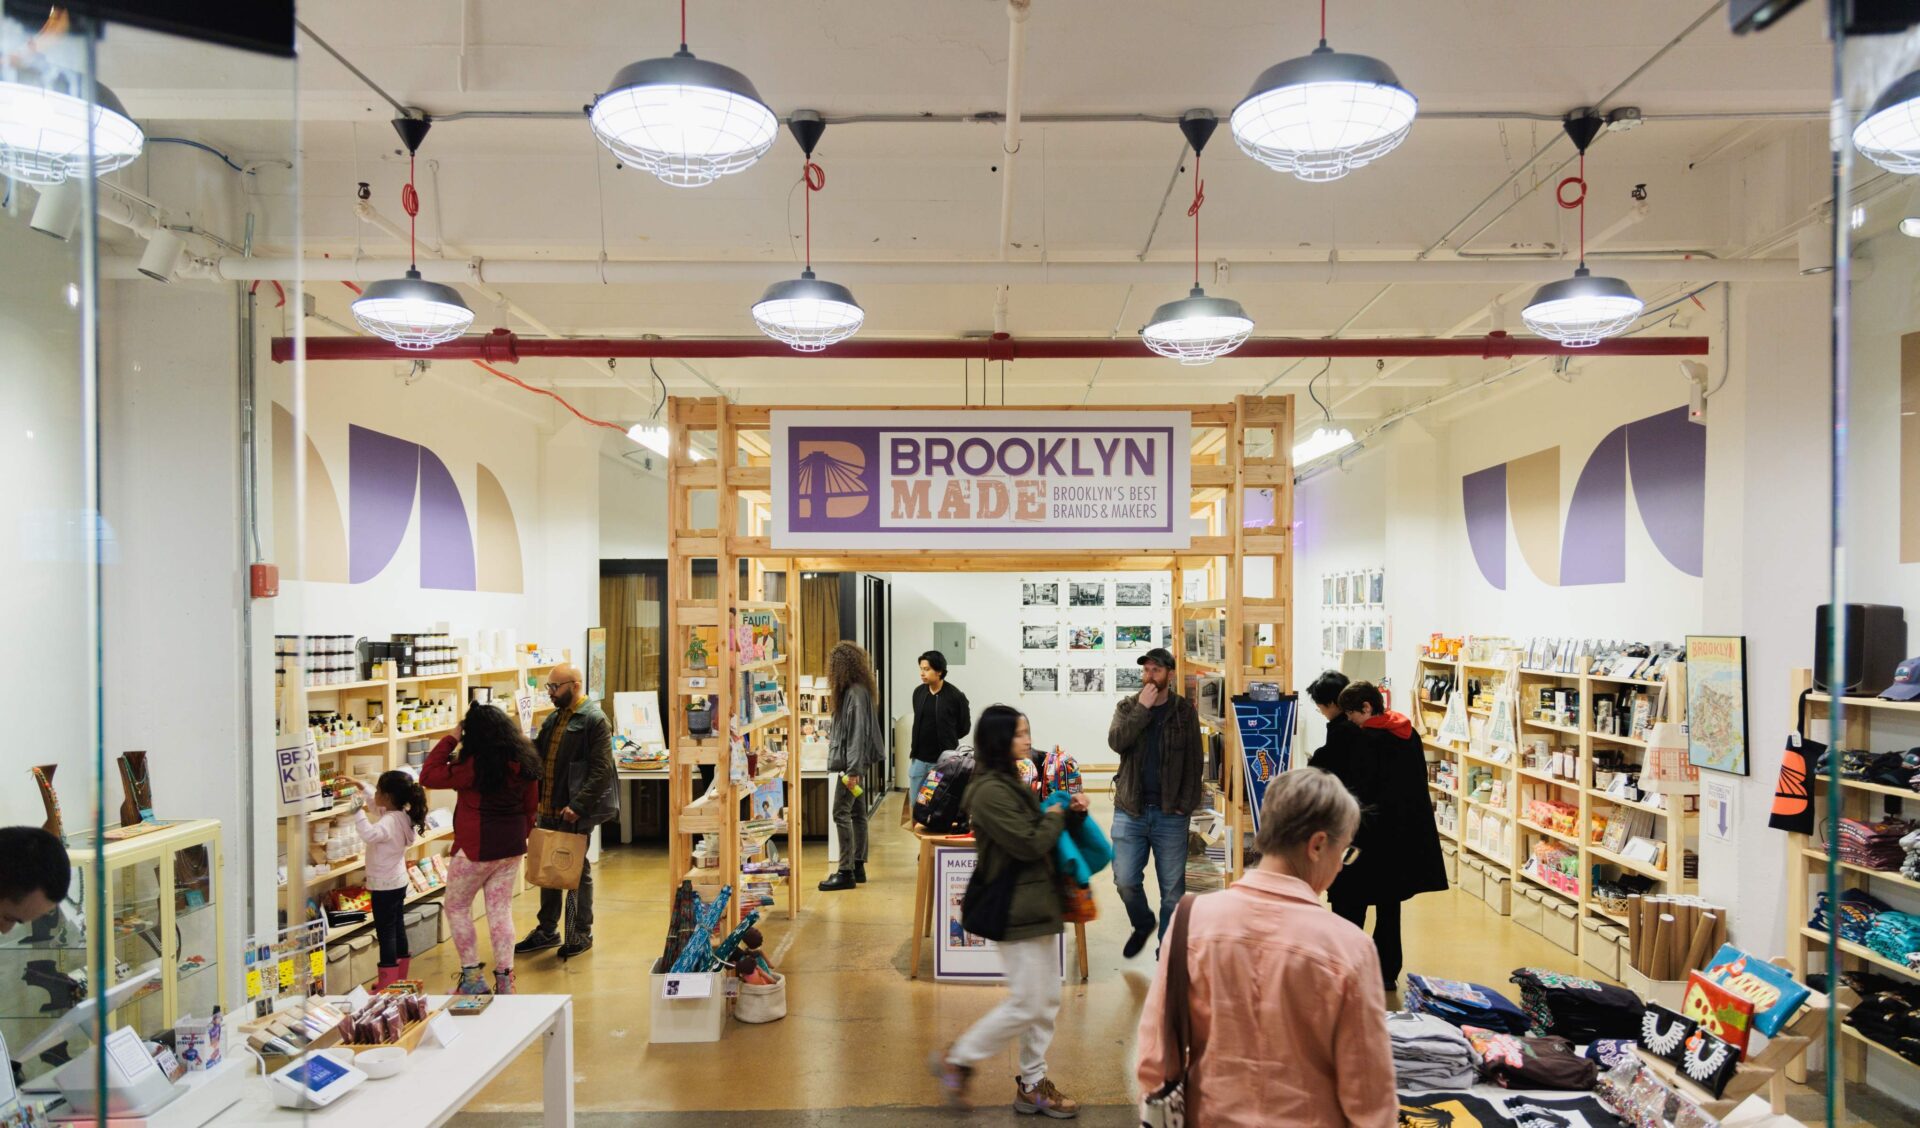 The interior of a store called "Brooklyn Made."